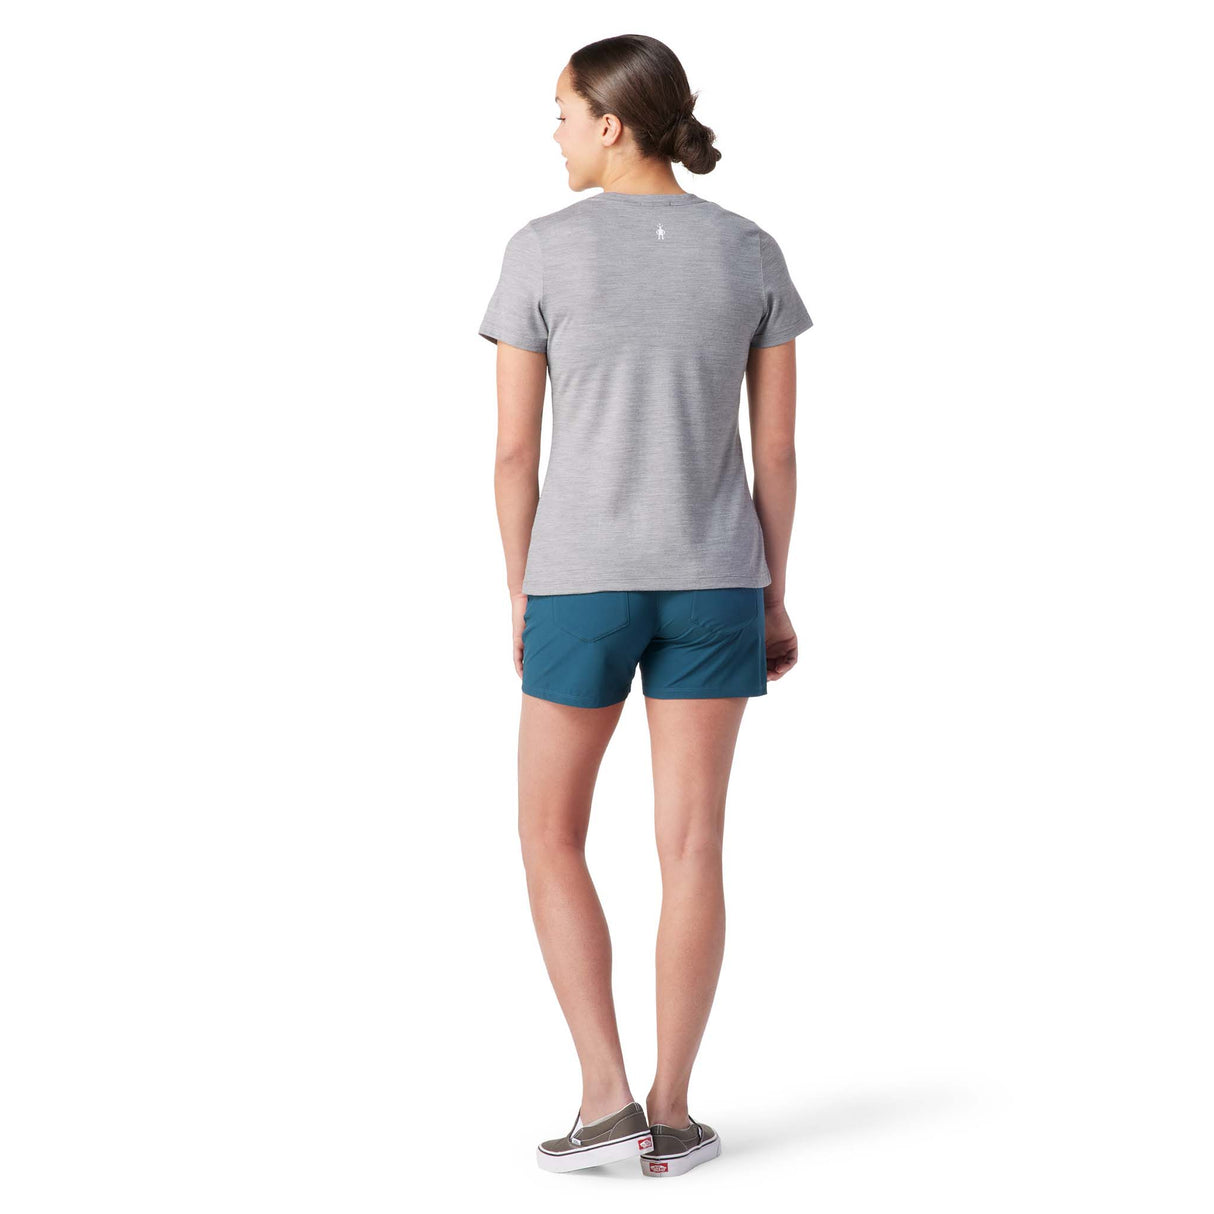 Smartwool Merino Sport 150 Dragonfly Summit t-shirt à manches courtes femme dos